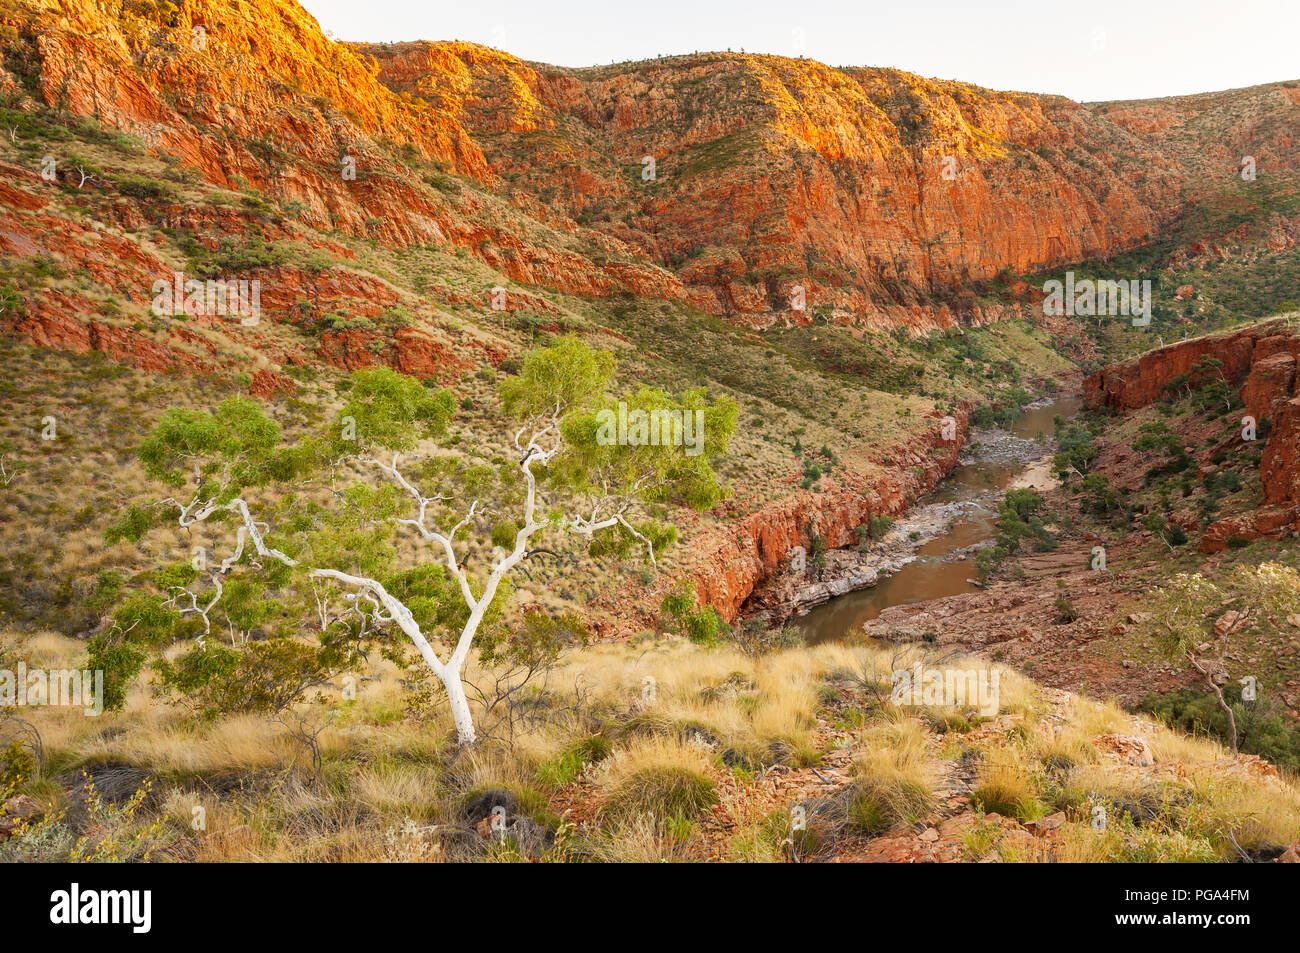 Incredibile Ormiston Gorge in Western MacDonnell Ranges. Foto Stock